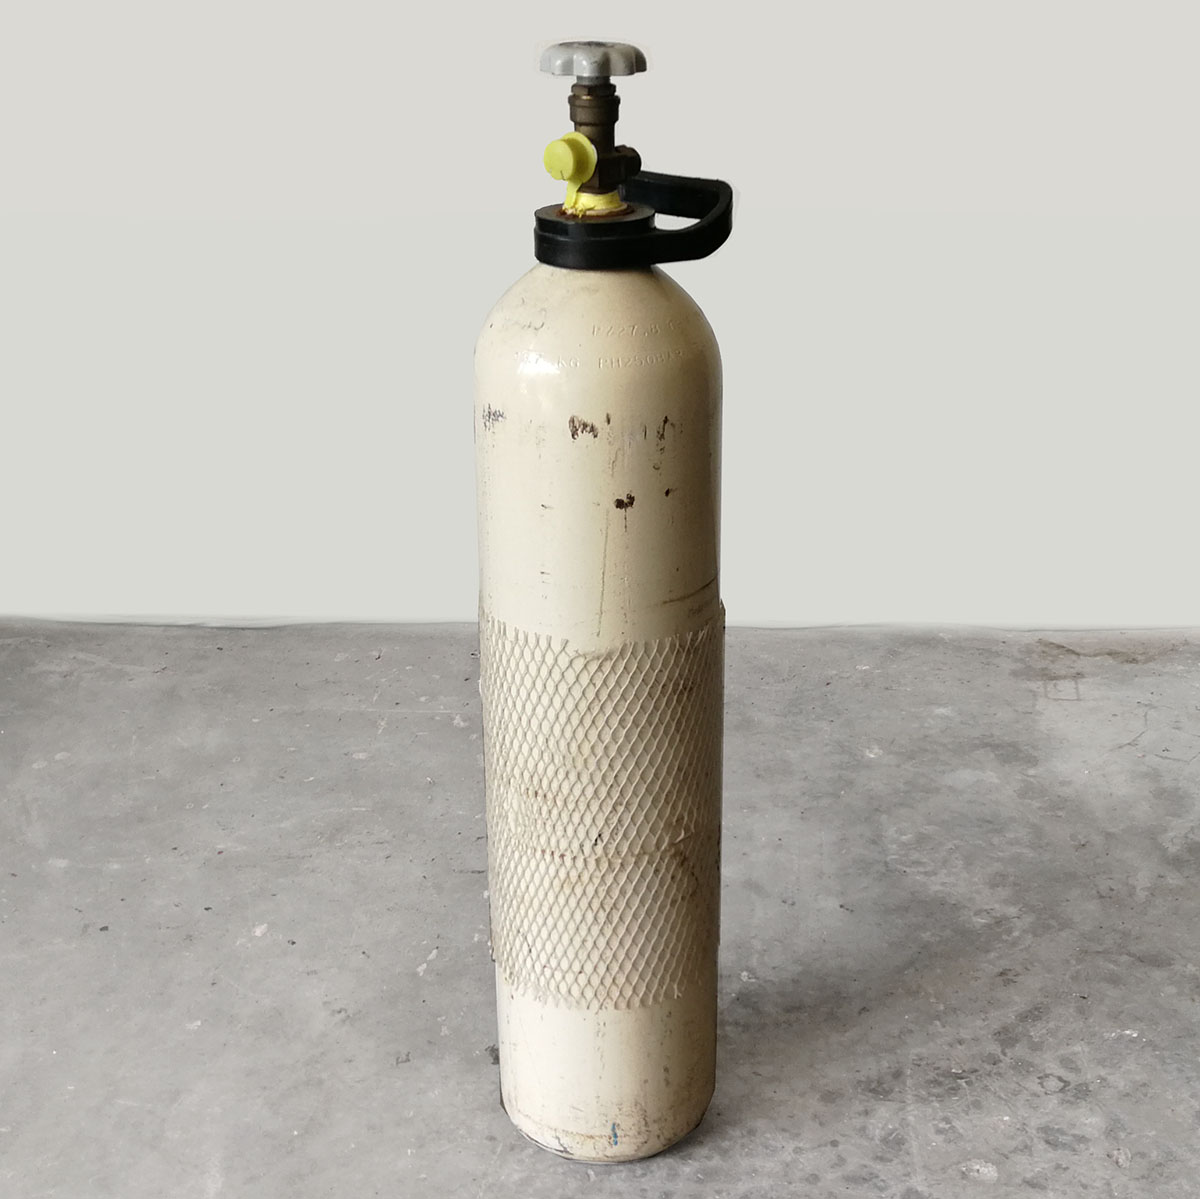 CO₂ Gas Cylinder for Viscount main image